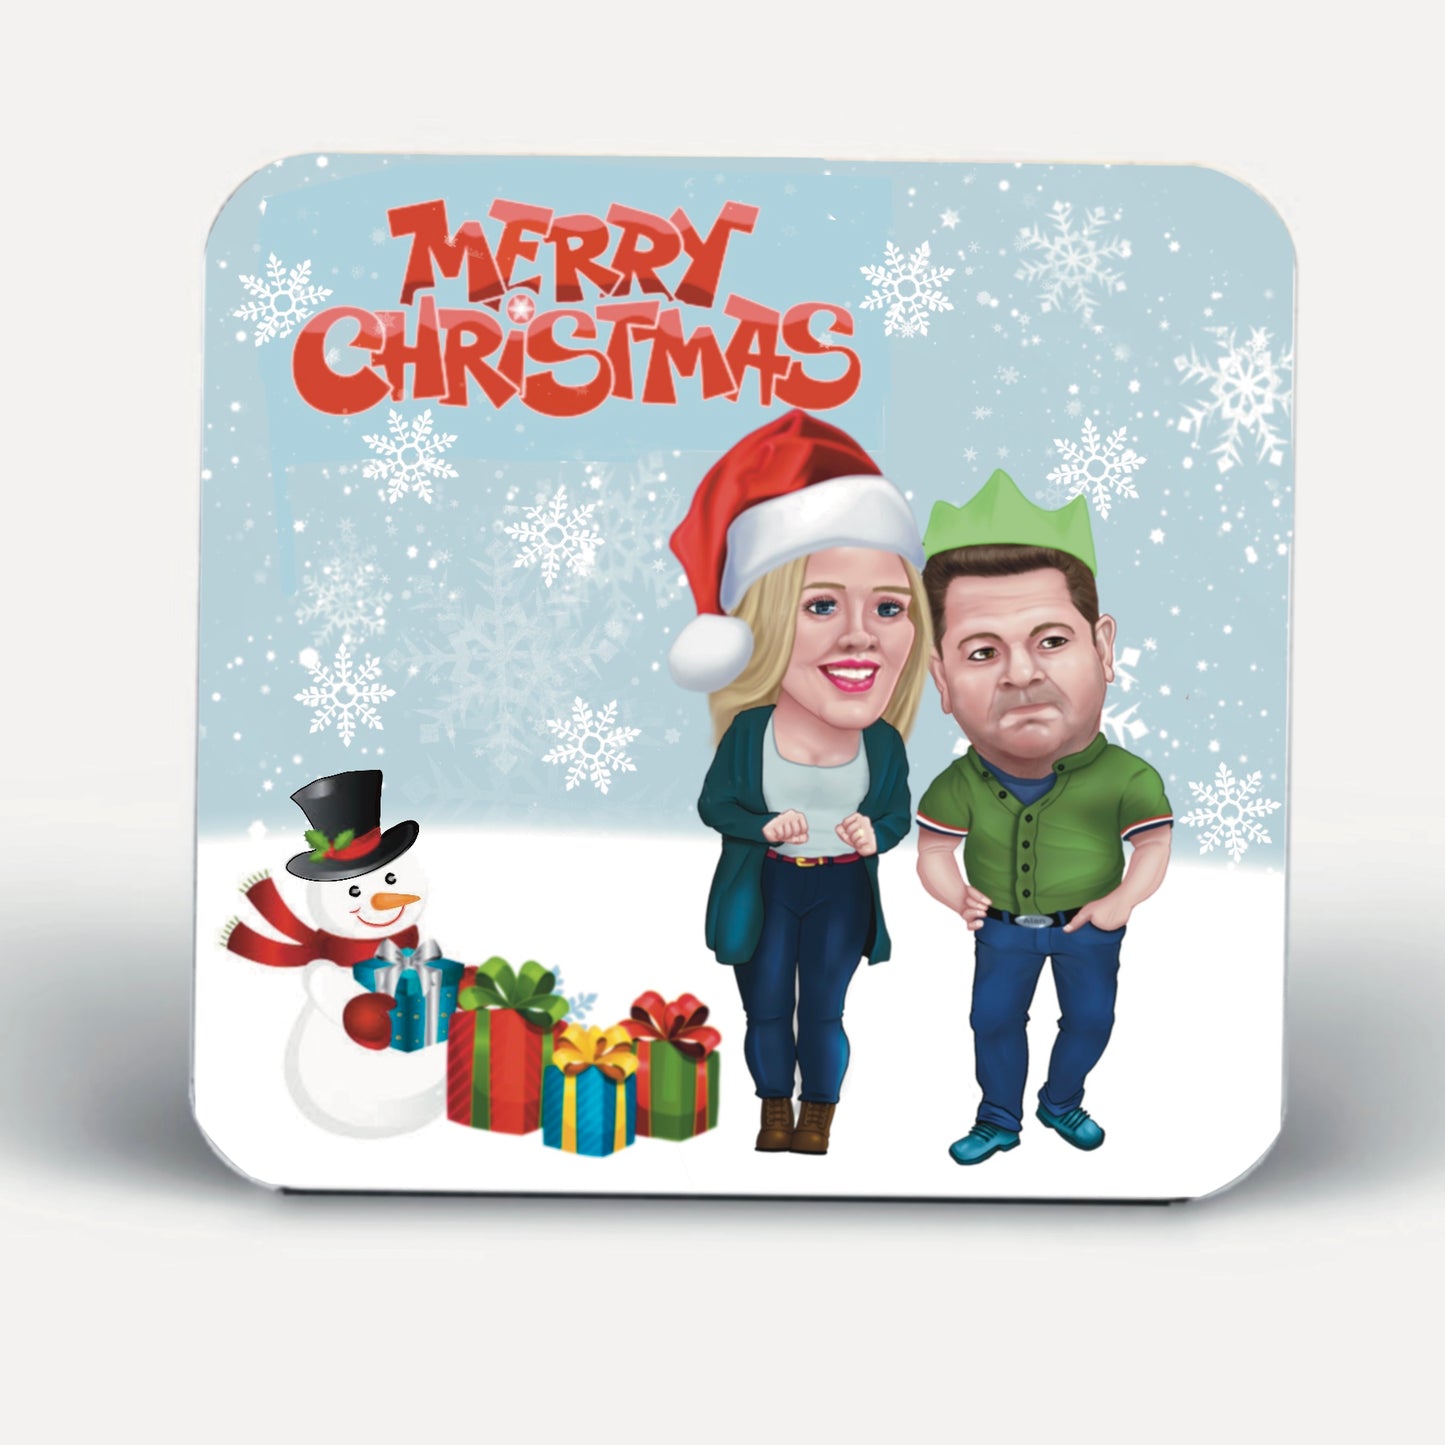 4 x Christmas two doors down inspired coasters-coasters